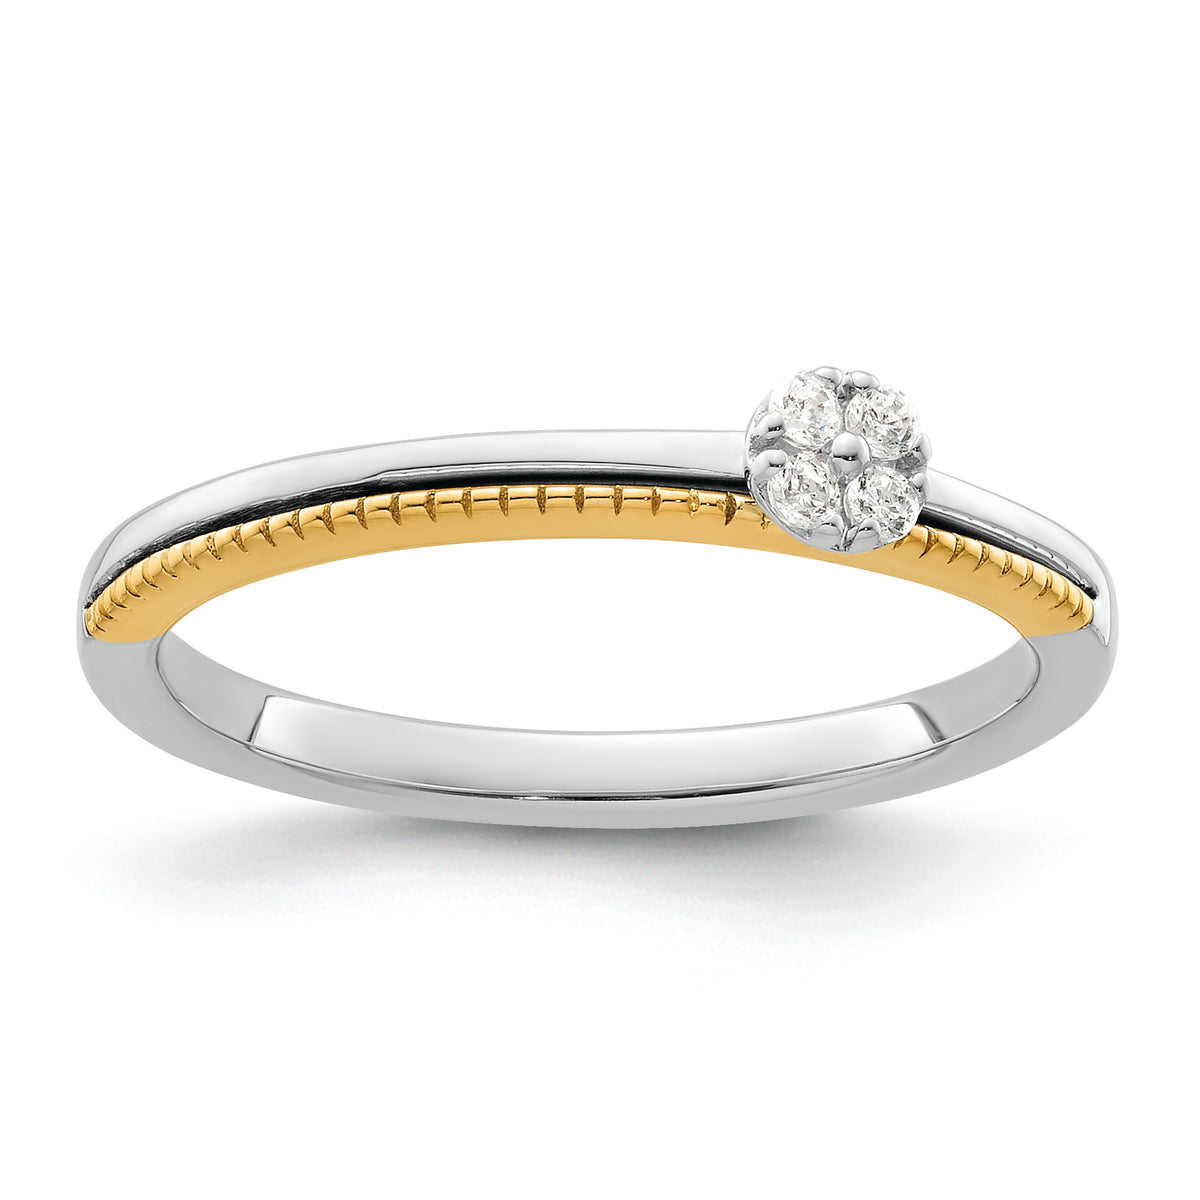 Two Promises 14k Two-tone Diamond Complete Promise or Band Ring